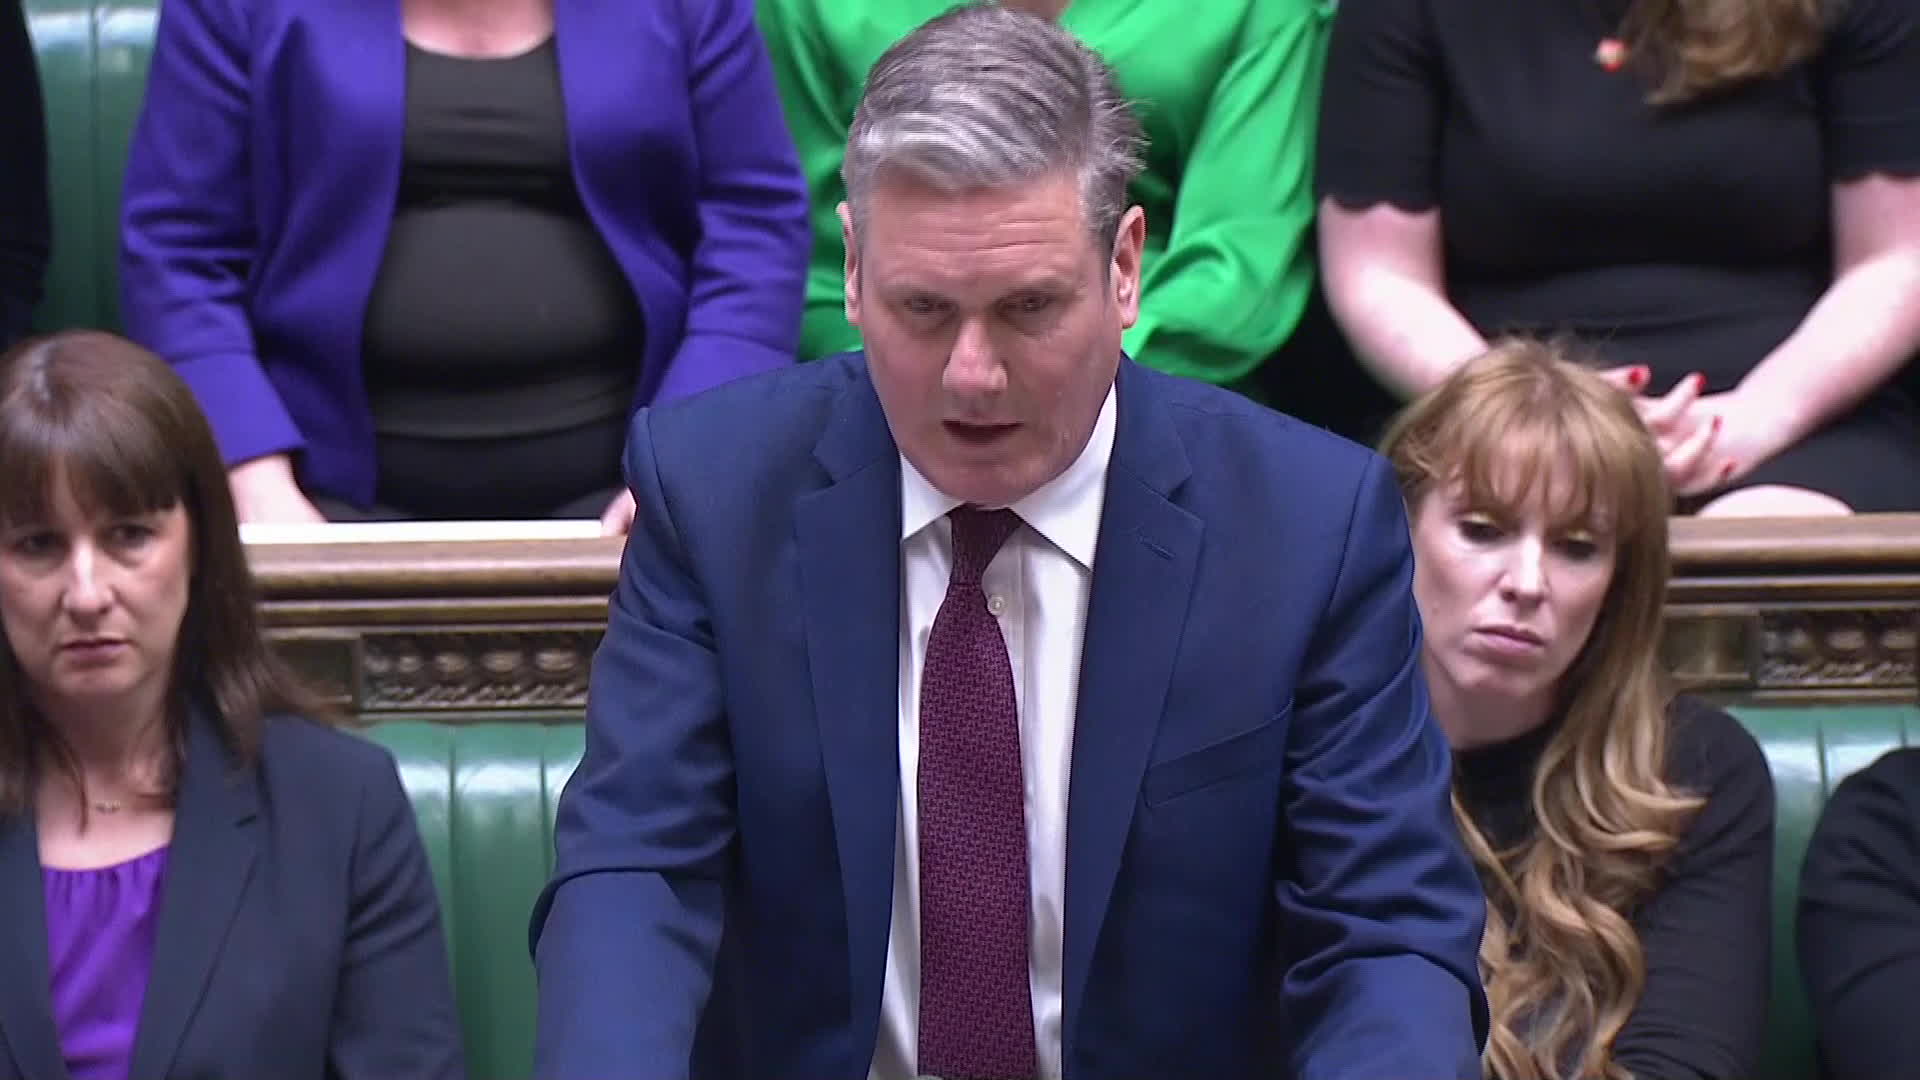 Starmer Says UK Probe 'Lays Bare the Rot' of PM's Office